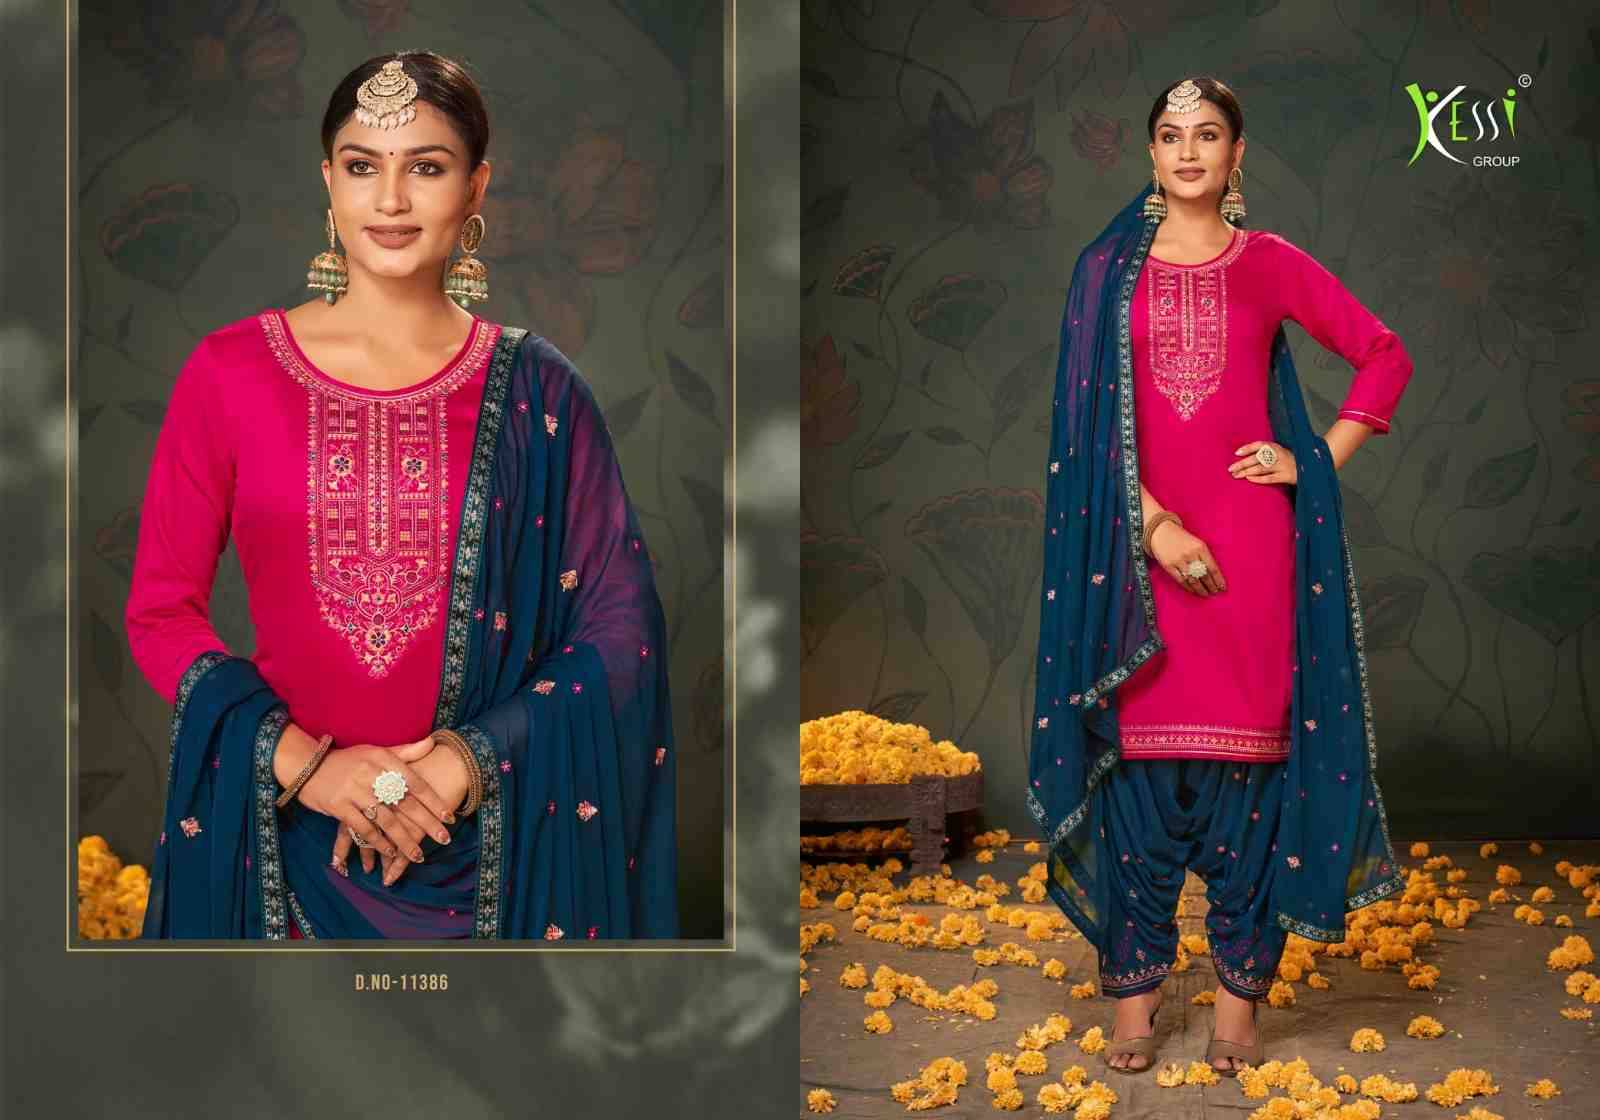 Patiala House Vol-95 By Kessi Fabrics 11381 To 11386 Series Beautiful Patiyala Suits Colorful Stylish Fancy Casual Wear & Ethnic Wear Pure Jam Cotton With Work Dresses At Wholesale Price